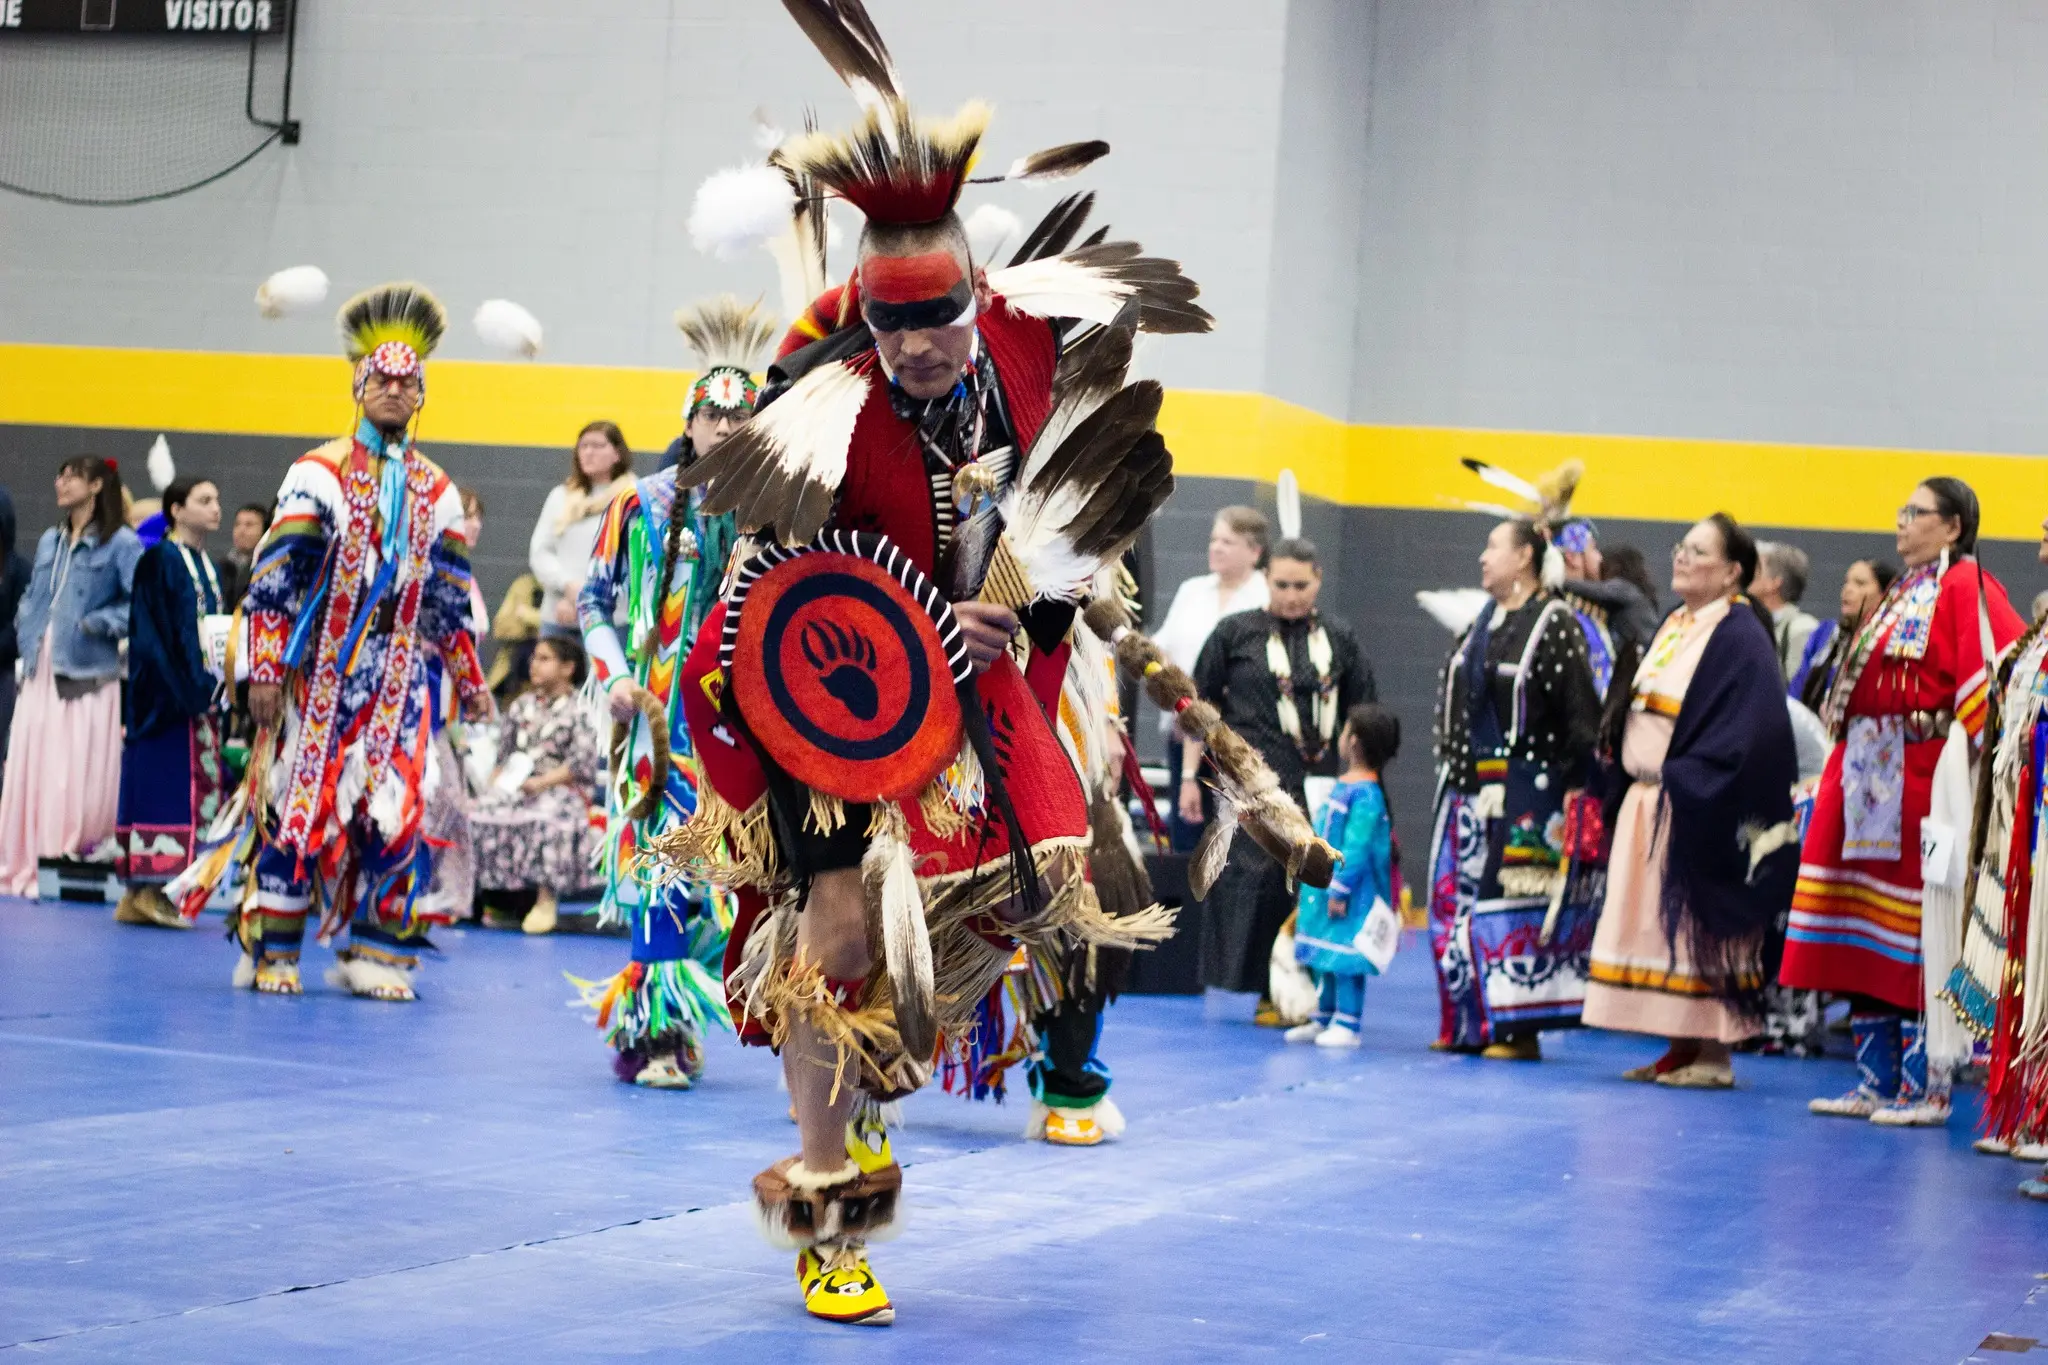 A Native American dressed in traditional clothing dances in front of a crowd.